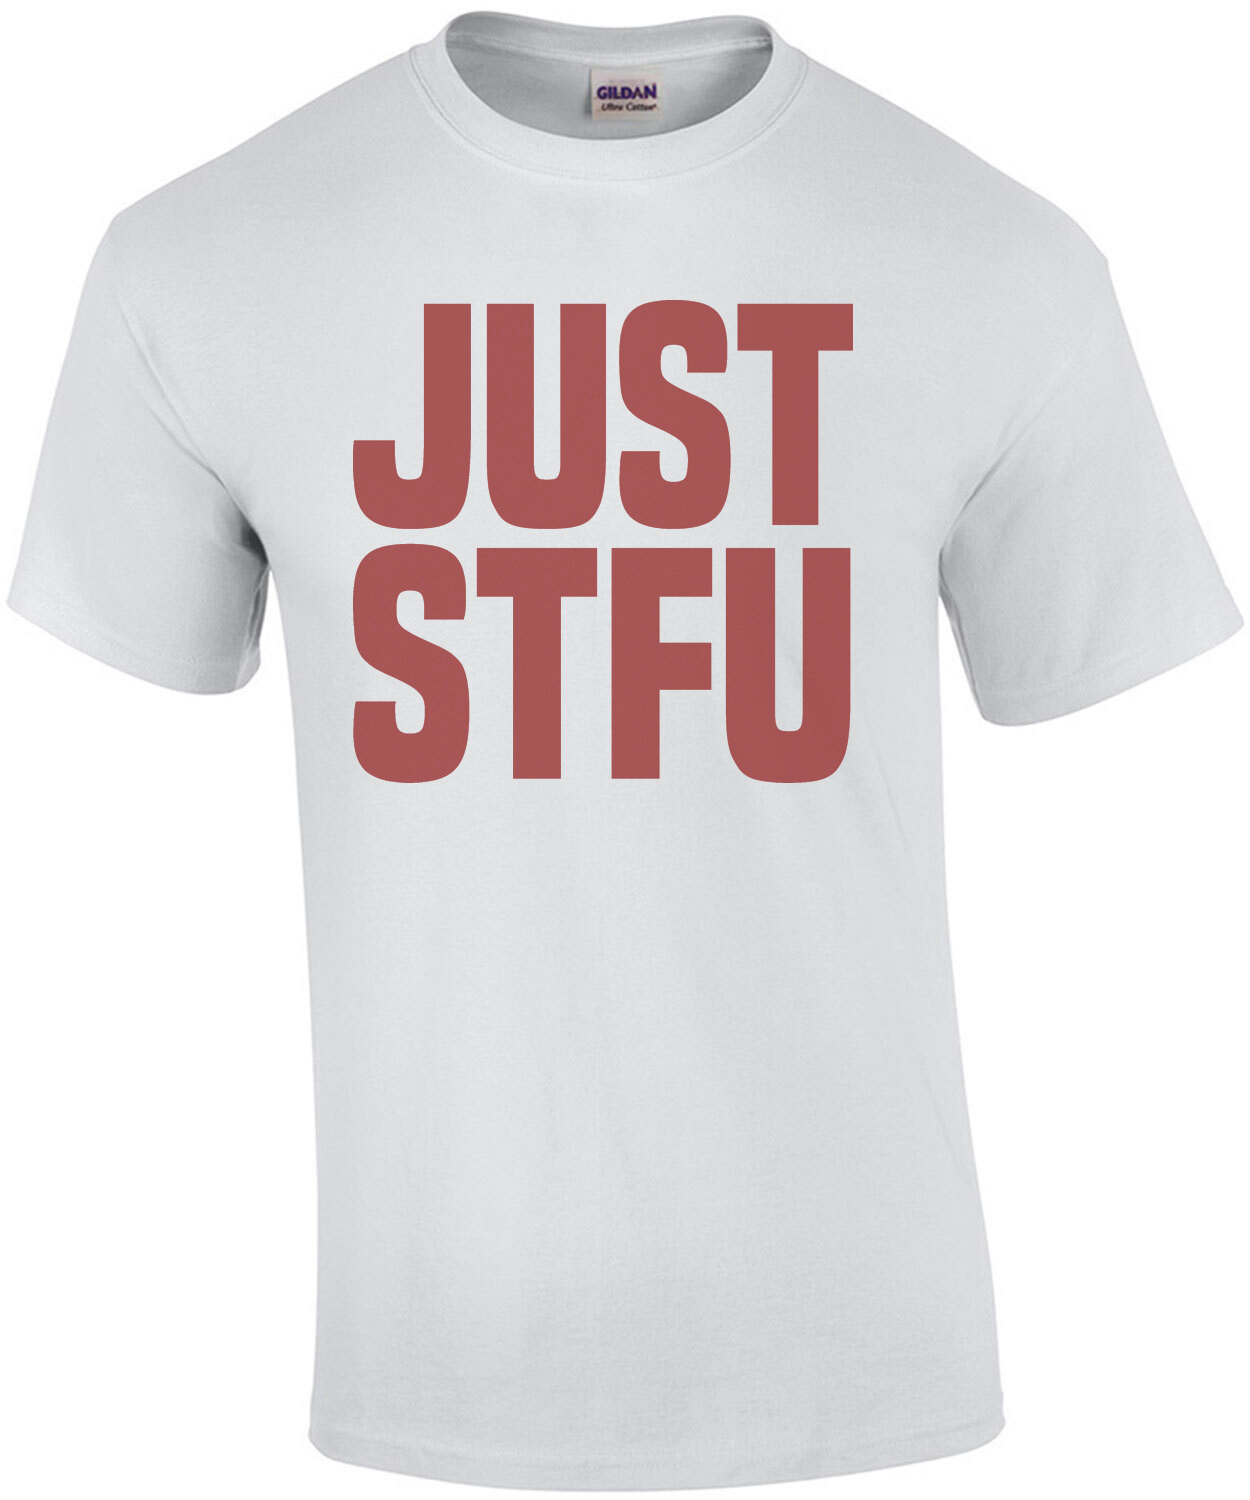 JUST STFU - Funny offensive t-shirt